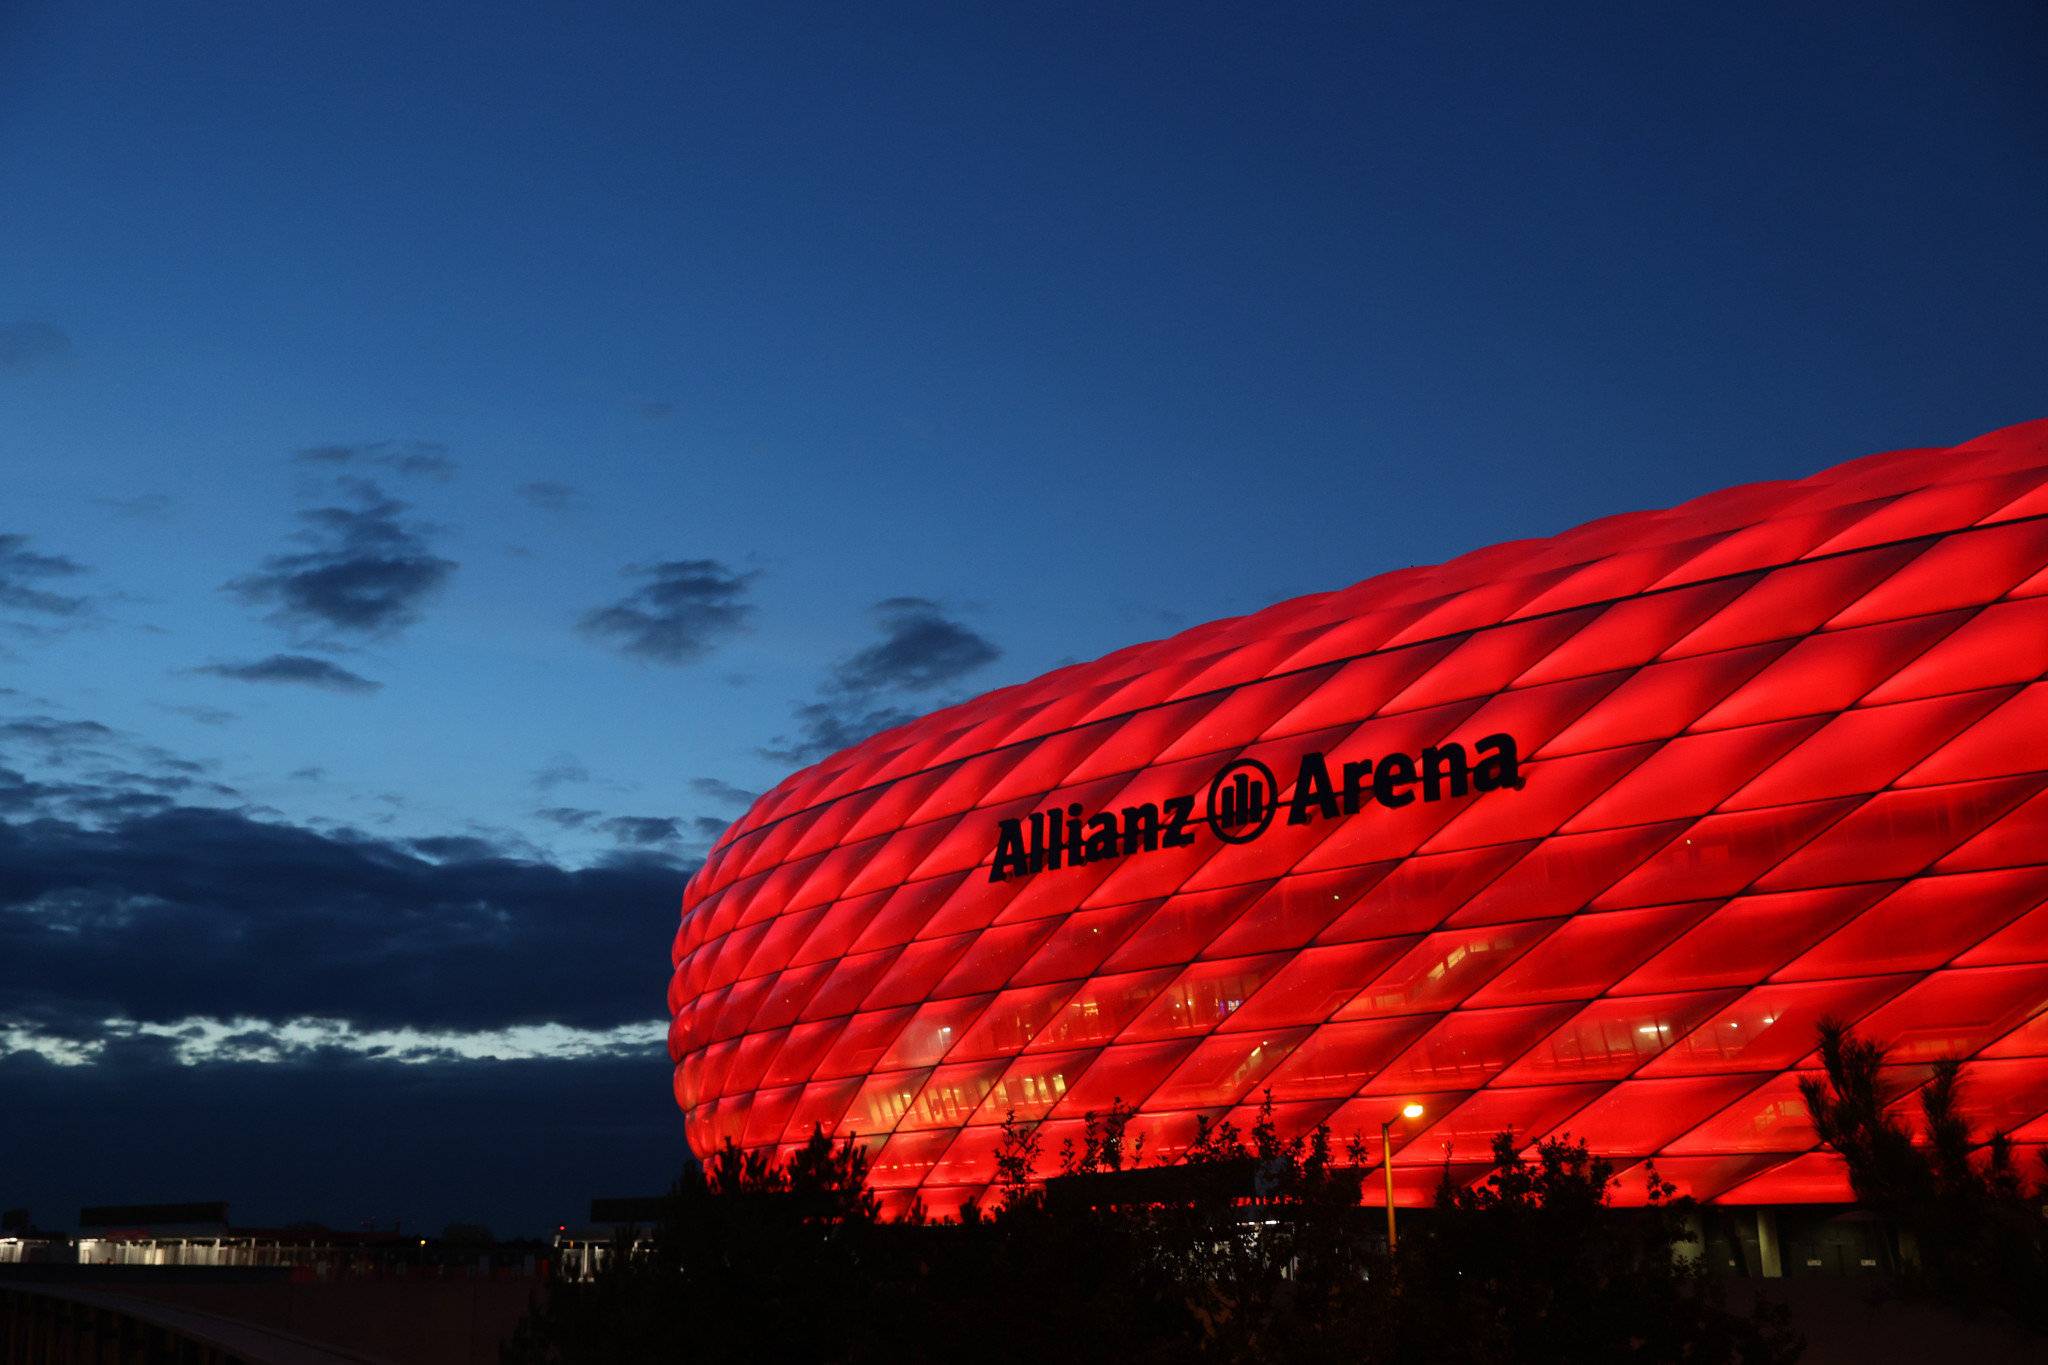 Bilbao and Dublin lose Euro 2020 matches but Munich confirmed as host